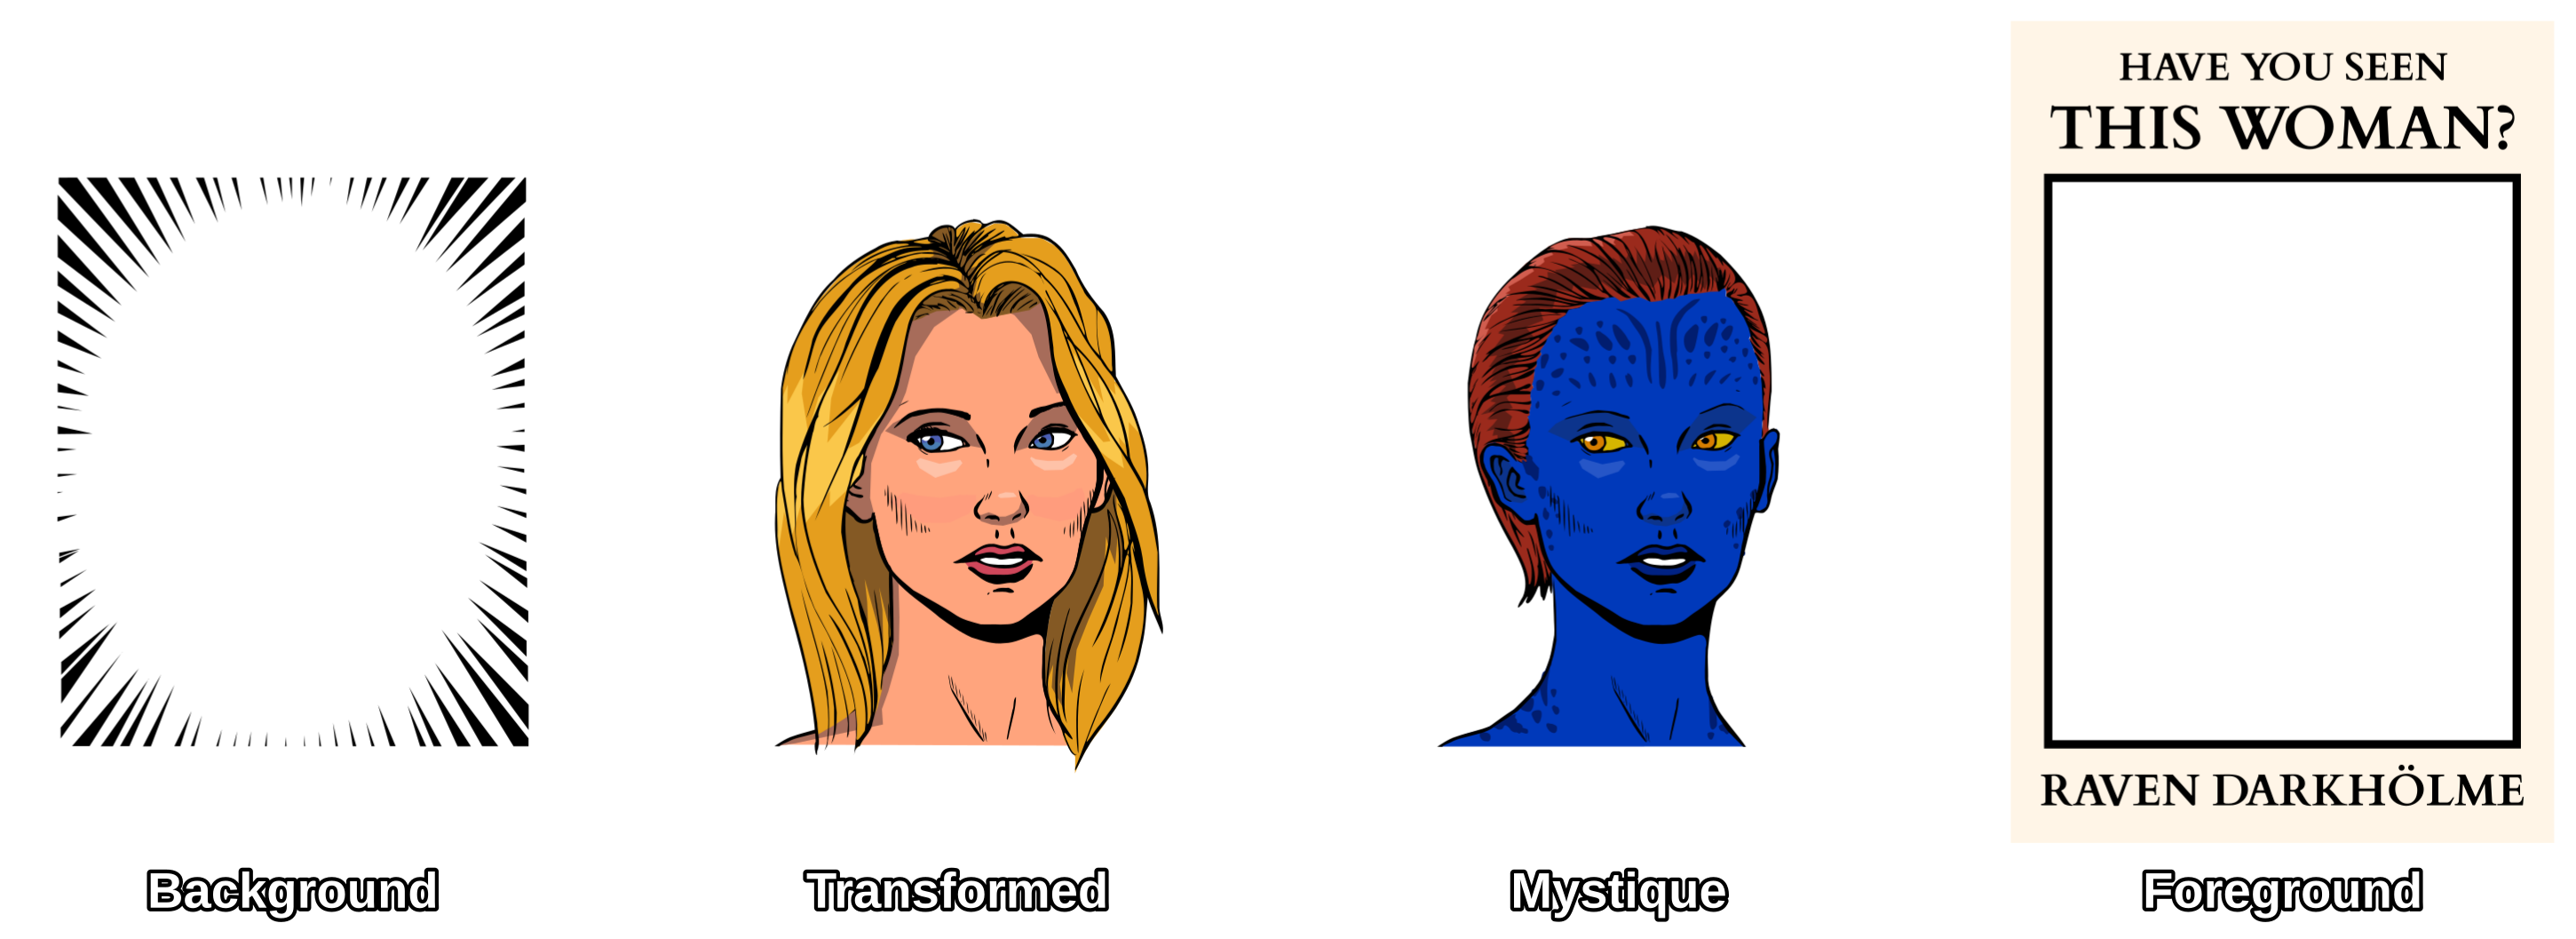  All the different parts of the final composition. From left to right, first is the background with a textured effect. Second, a drawing of a disguised mystique as a blonde woman. Third, mystique in her natural blue form. Fourth is the foreground, a poster with the words "Have you seen this woman?" at the top, a blank space in the middle and "Raven Darkhölme" at the bottom.